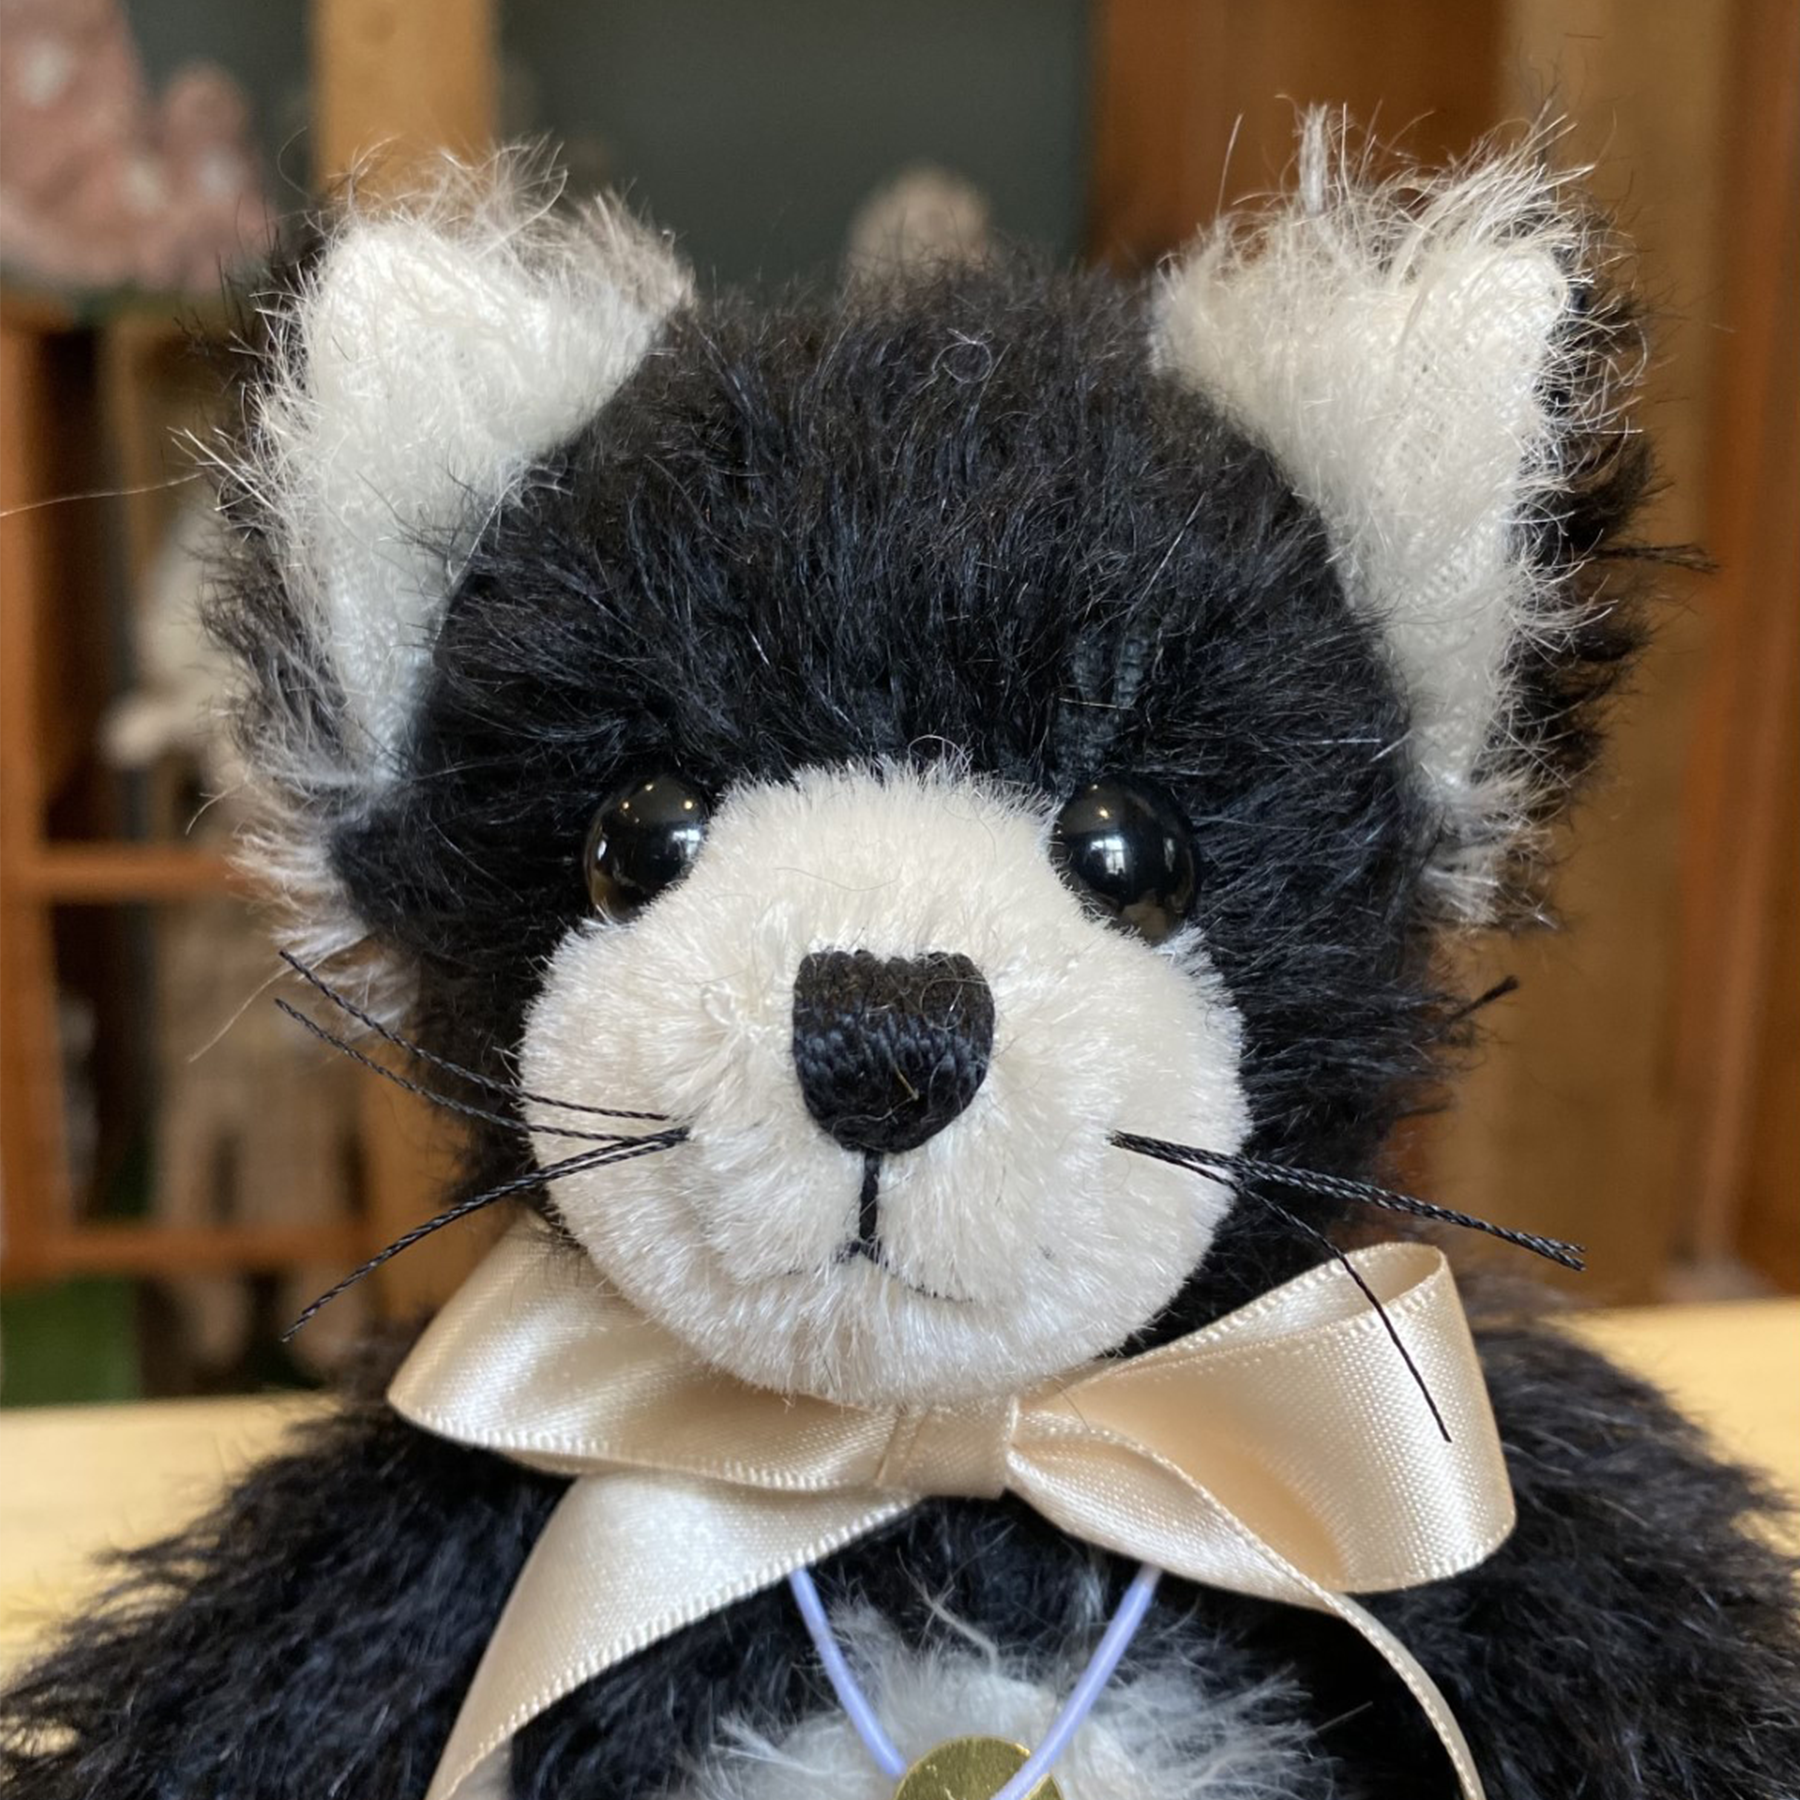 Merrythought's delightful cat has been skilfully made from jet black mohair, contrasted with pure white inner ears and tummy.